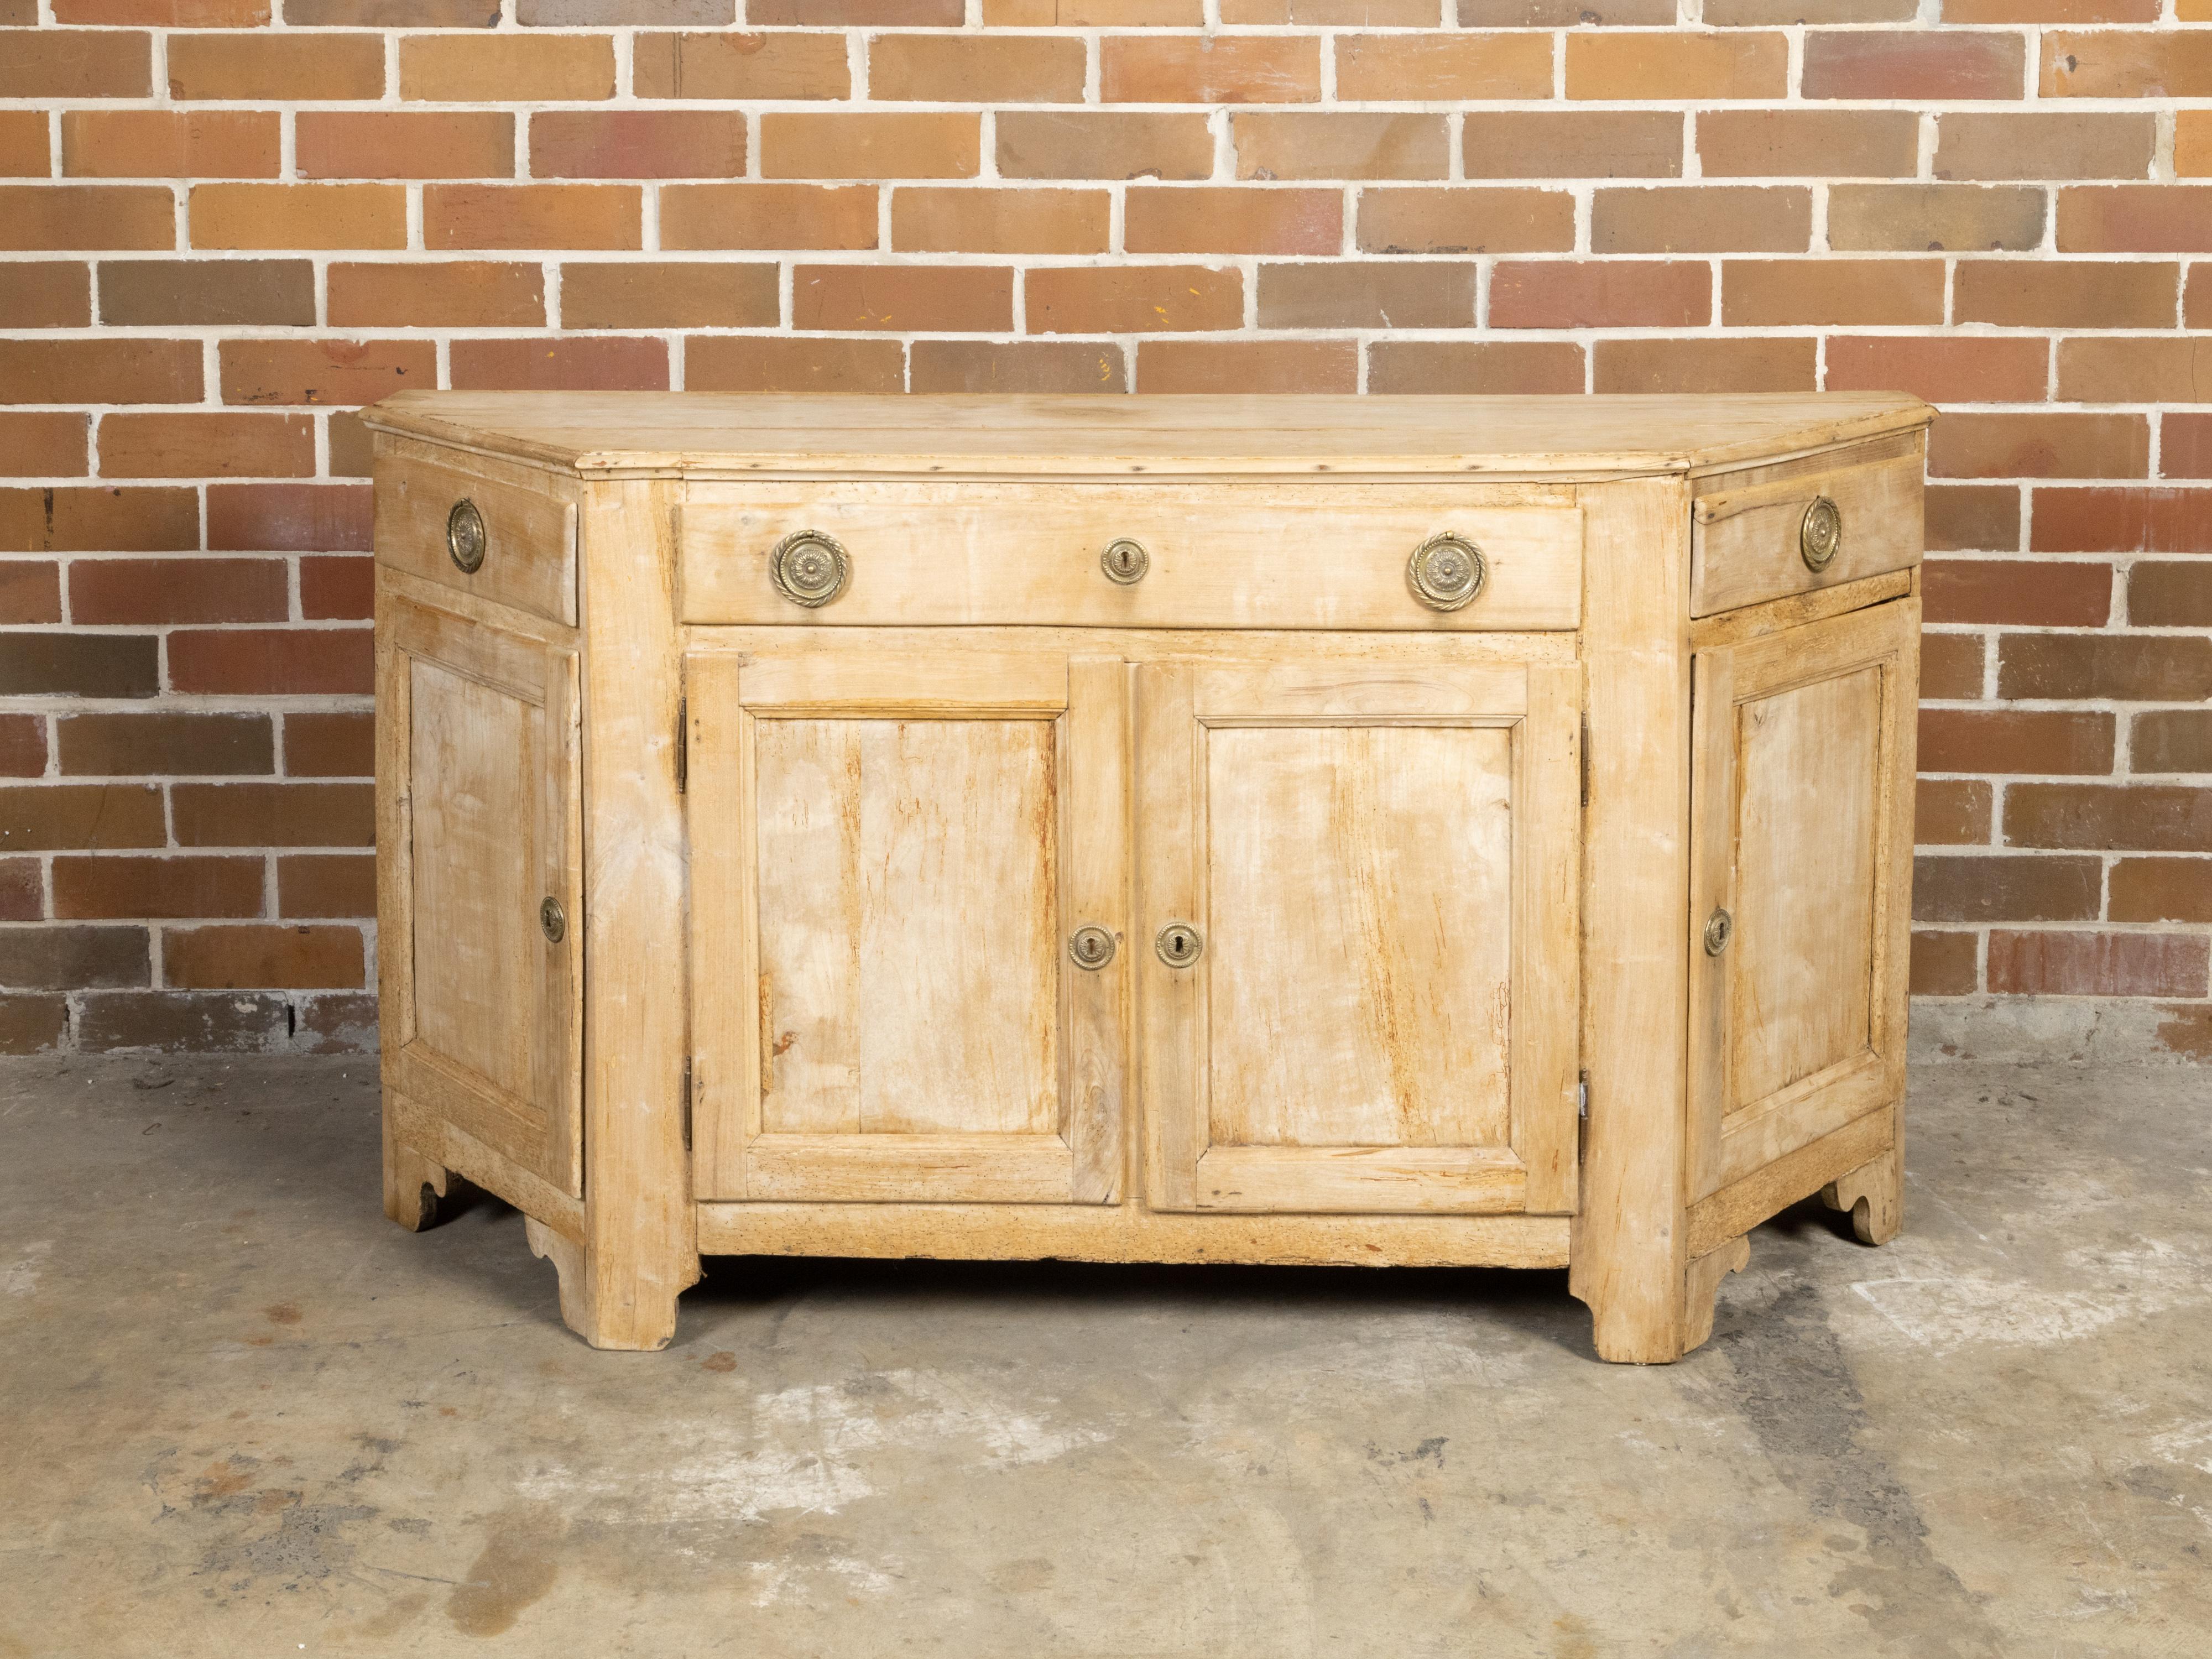 An Italian bleached wood credenza from the early 19th century, with canted sides, three drawers over four doors. Created in Italy during the early years of the 19th century, this stunning credenza features a linear silhouette perfectly complimented